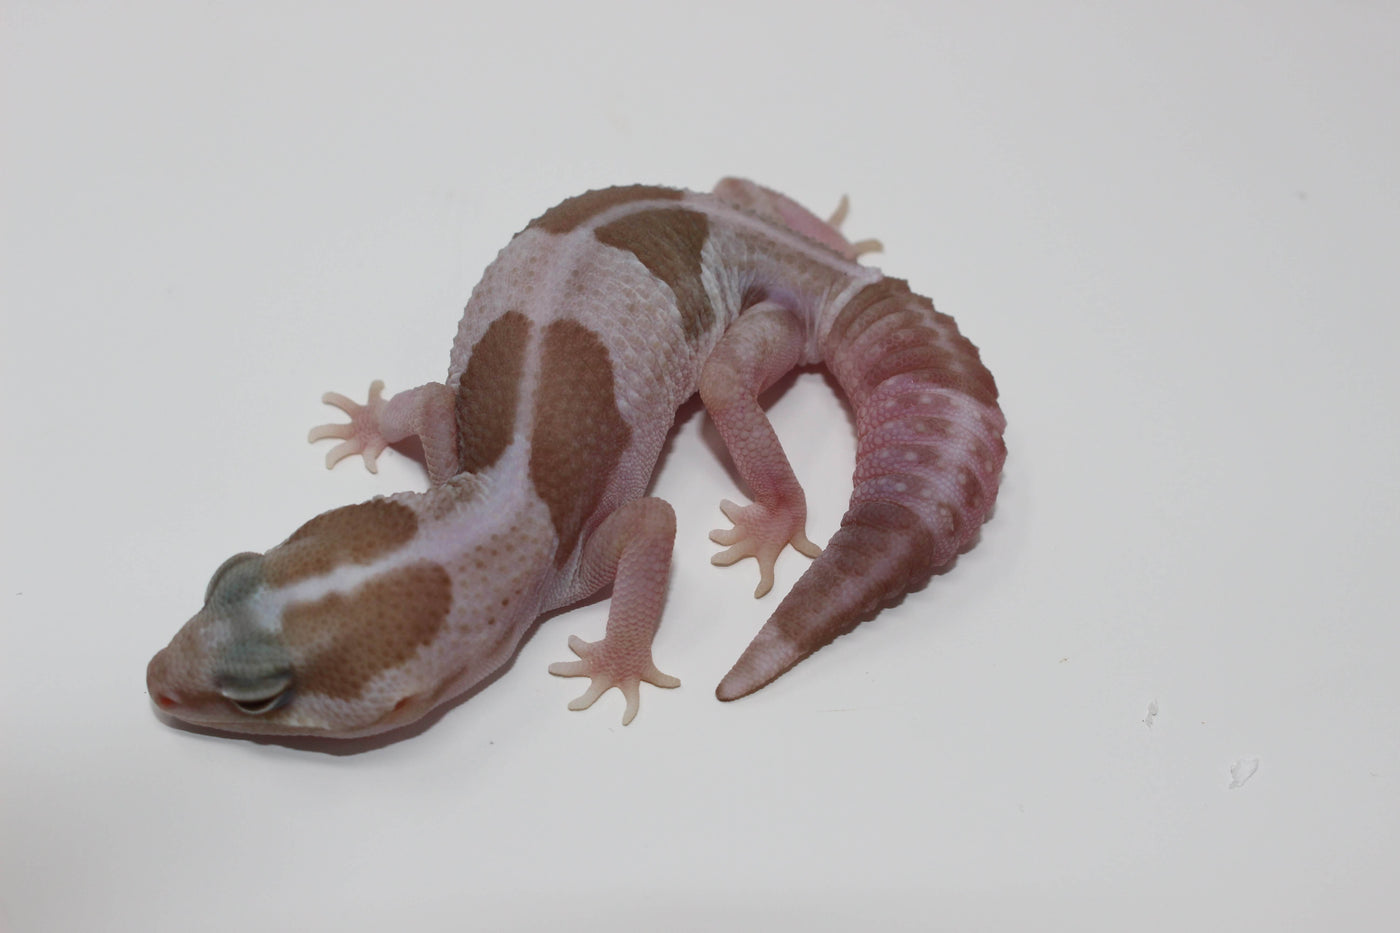 Striped Snow African Fat Tail gecko for sale, buy reptiles online